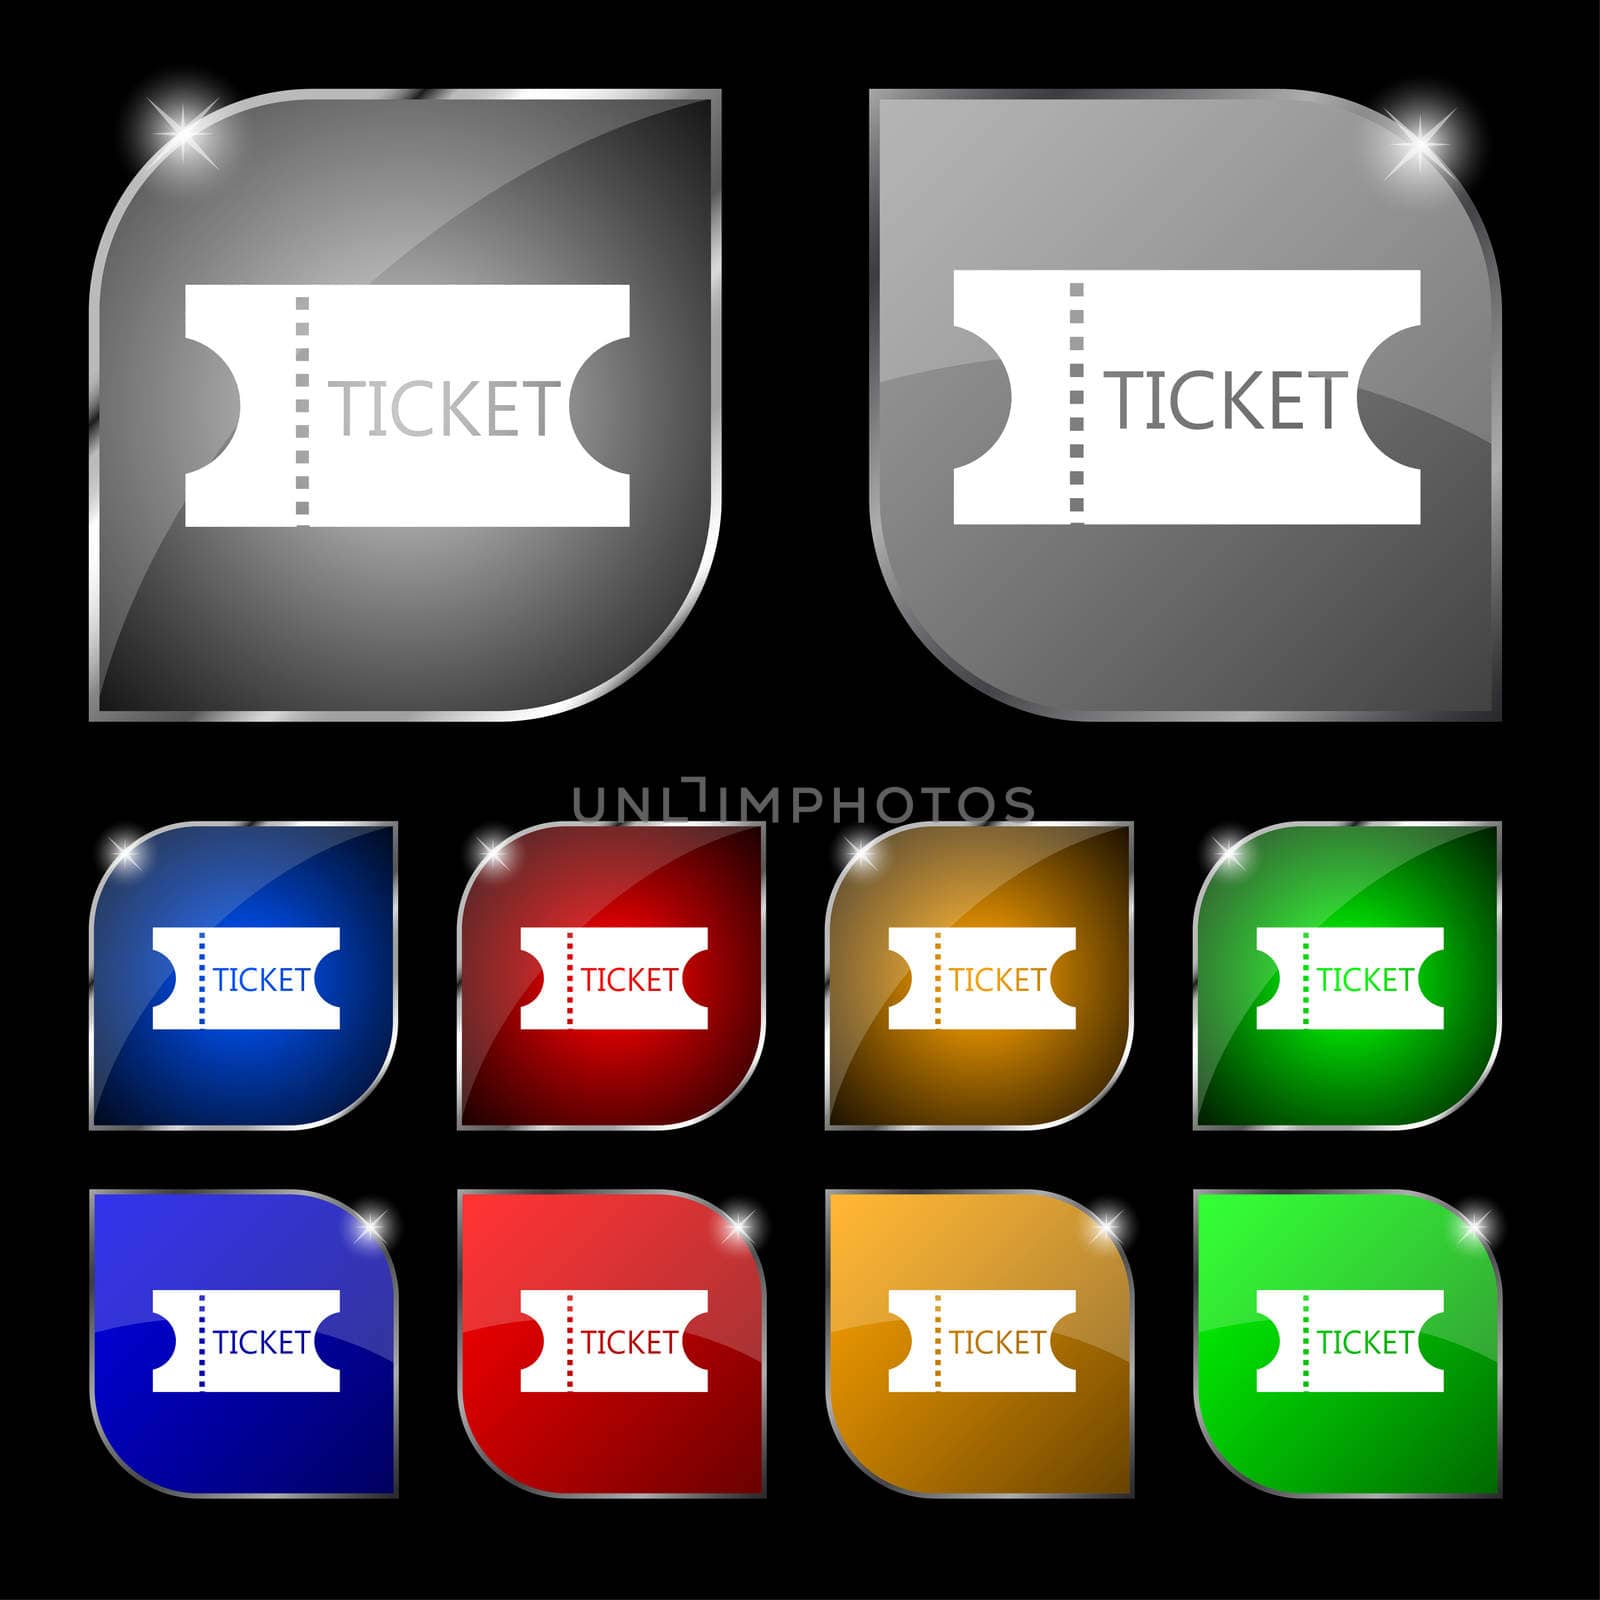 ticket icon sign. Set of ten colorful buttons with glare. illustration